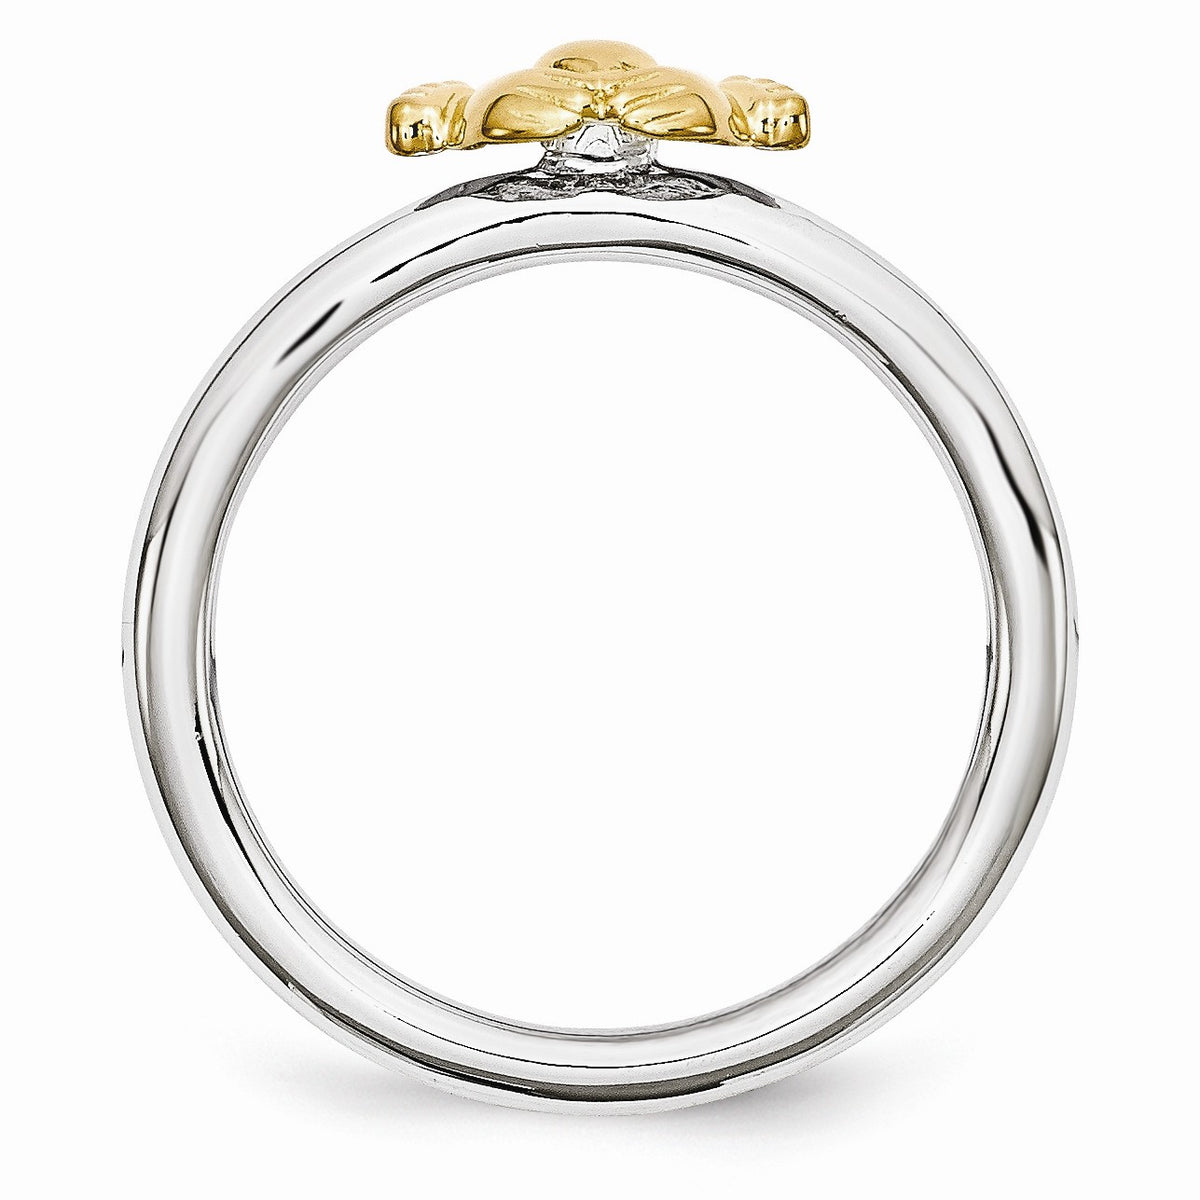 Alternate view of the Rhodium &amp; Gold Tone Plated Sterling Silver Stackable Claddagh Ring by The Black Bow Jewelry Co.